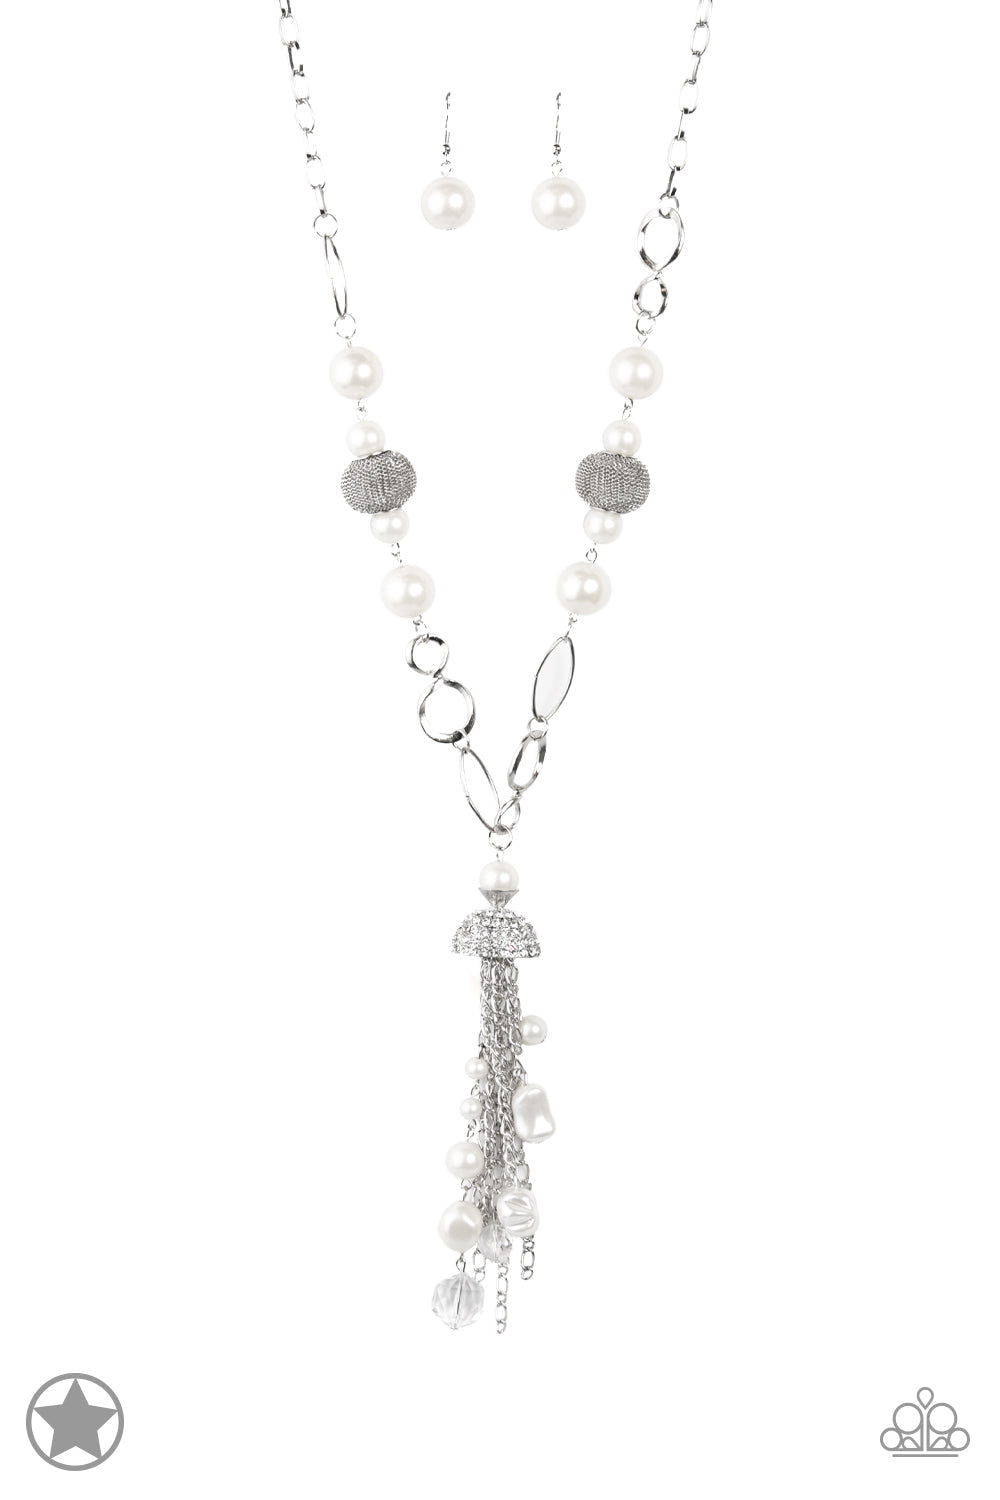 Designated Diva - White Pearl Necklace - Paparazzi Accessories - A half-shell studded in rhinestones overhangs a cluster of ivory pearls, tassels of silver chain, and small crystals. Two large wire mesh spheres and larger ivory pearls decorate the neckline.